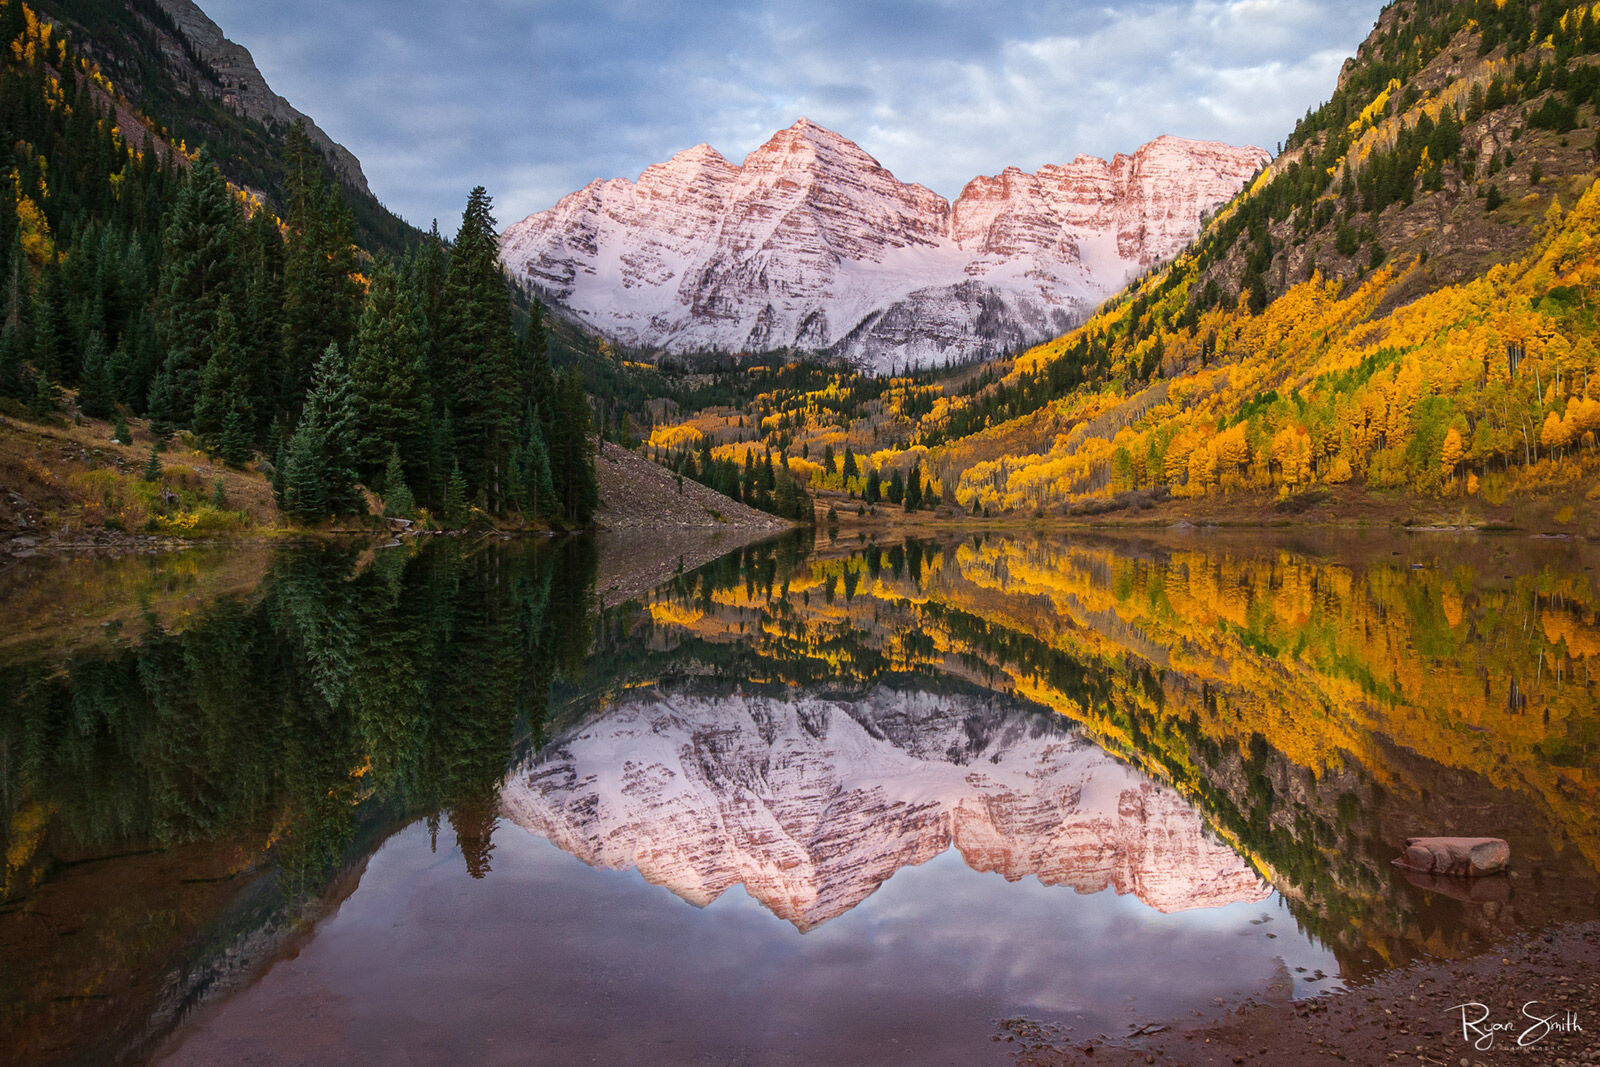 Snow covered mountains are touched by the sunlight and surrounded by hillsides of fall colors with the whole scene reflected in the still lake. 